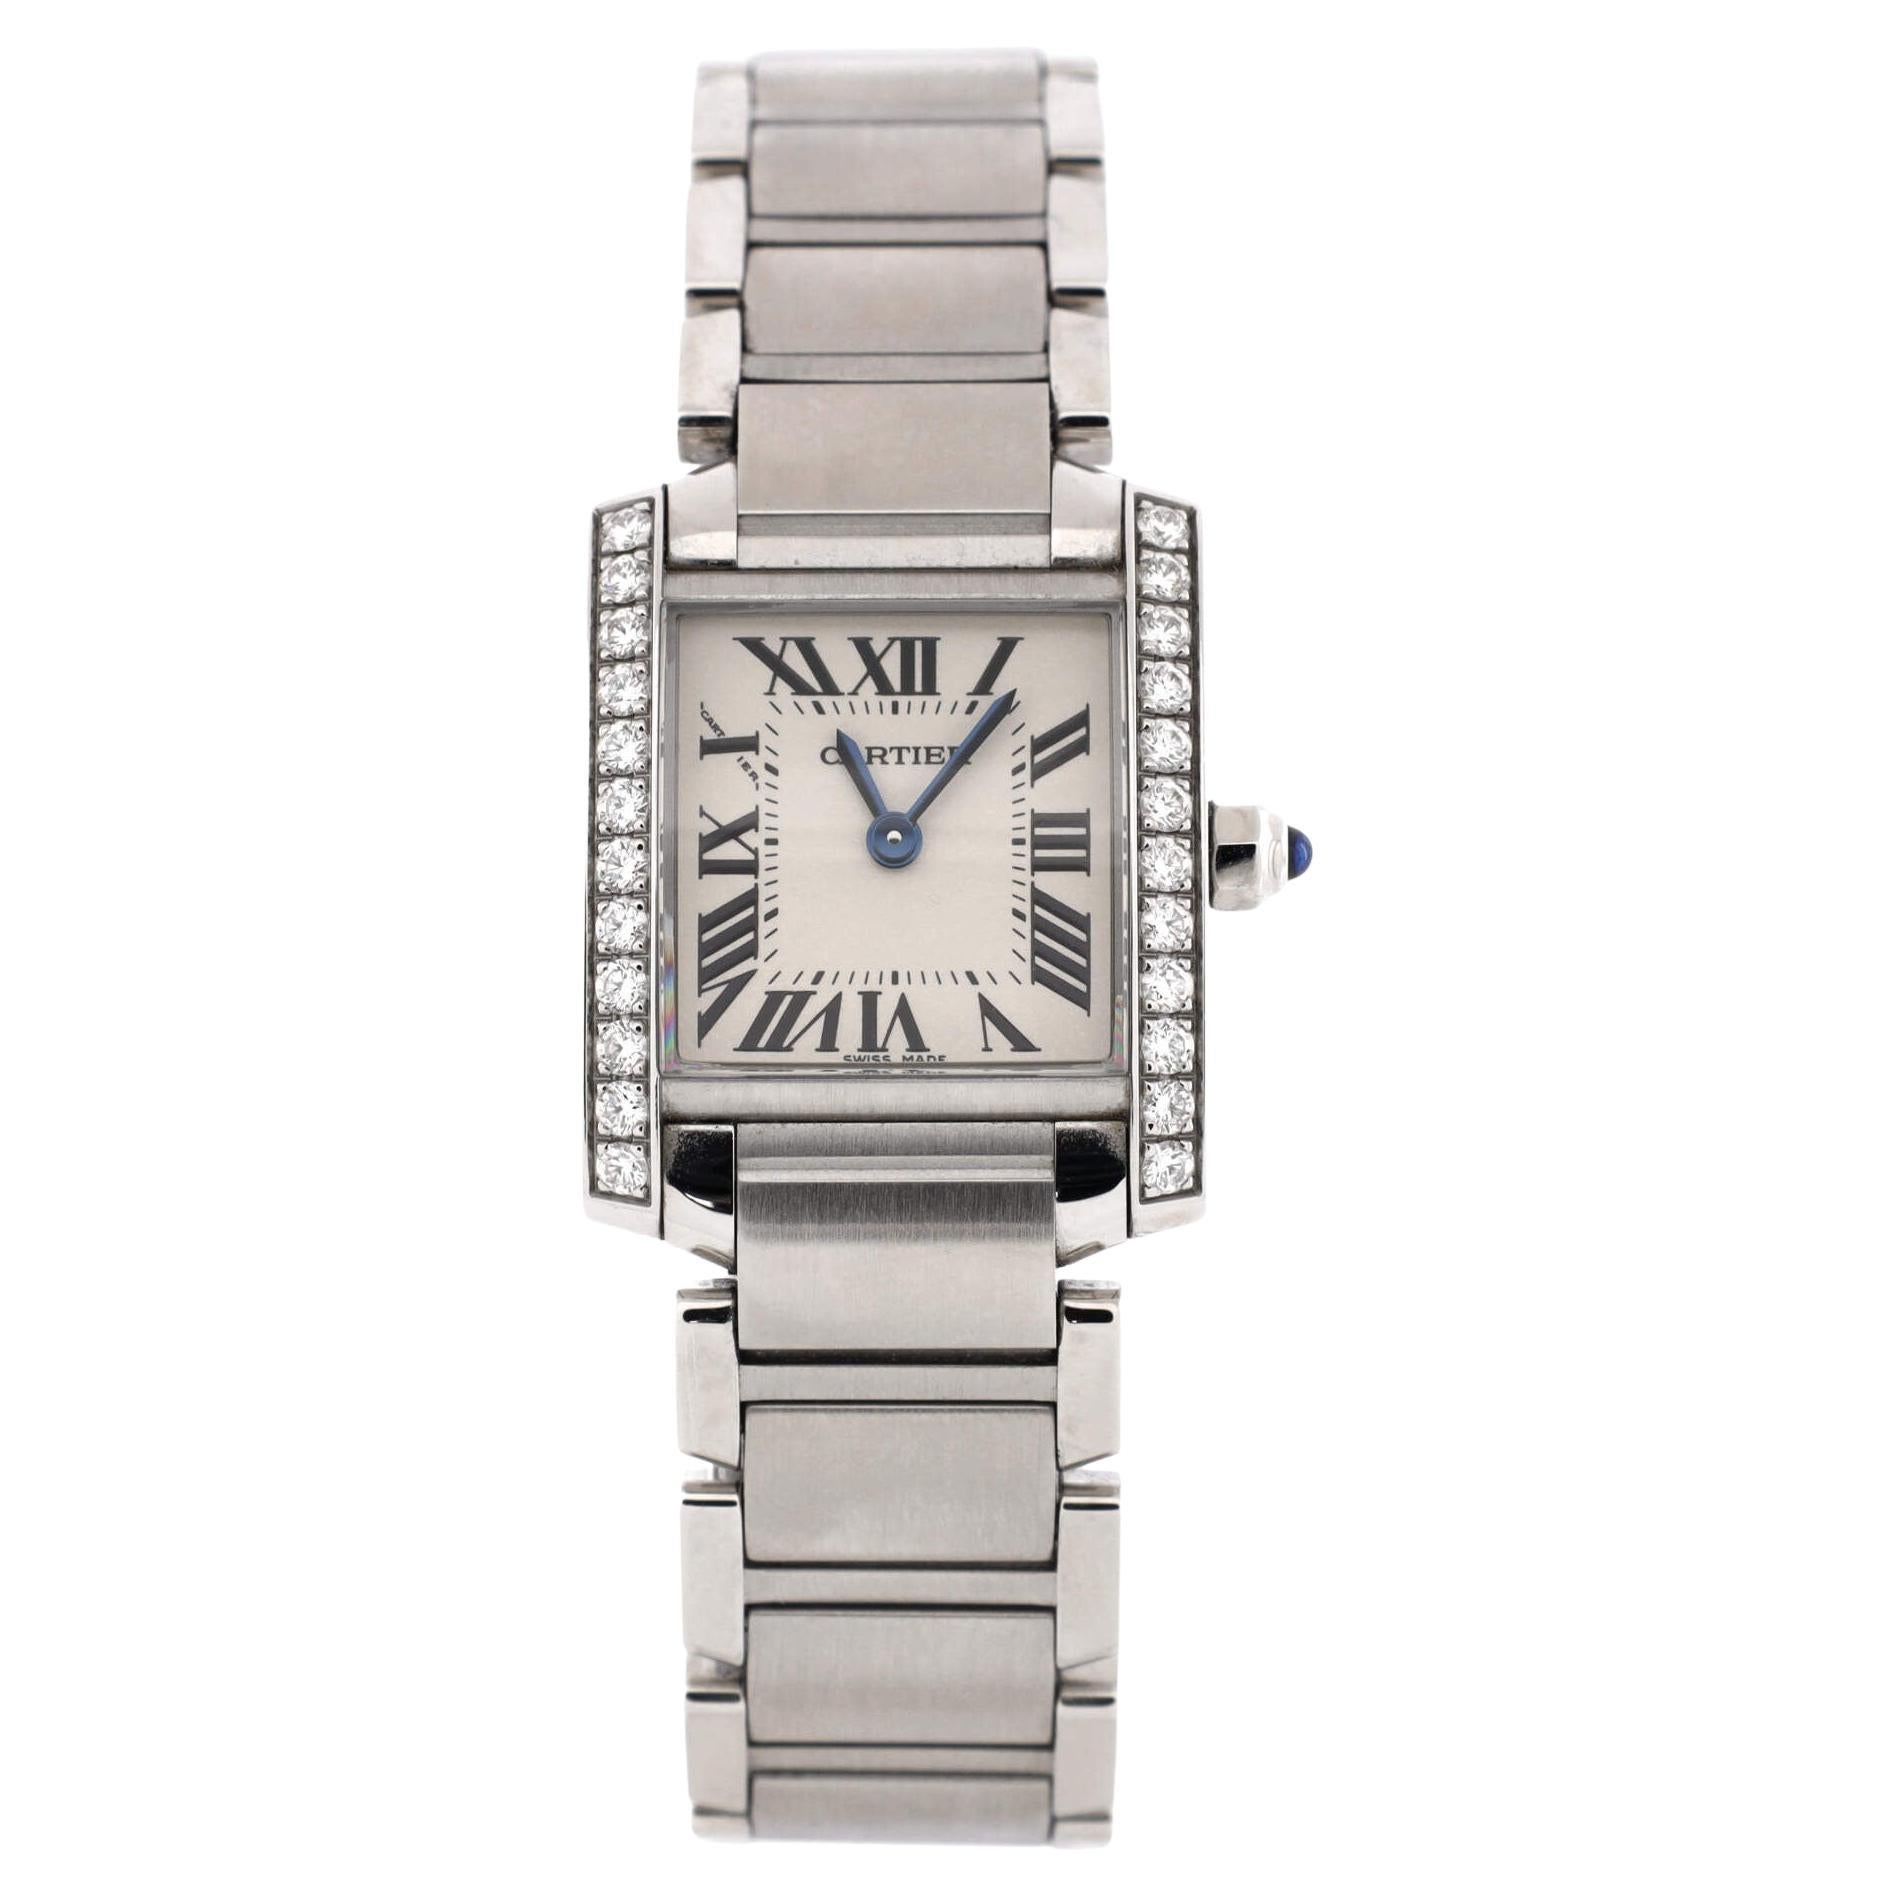 Cartier Tank Francaise Quartz Watch Stainless Steel with Diamond Bezel 20 For Sale